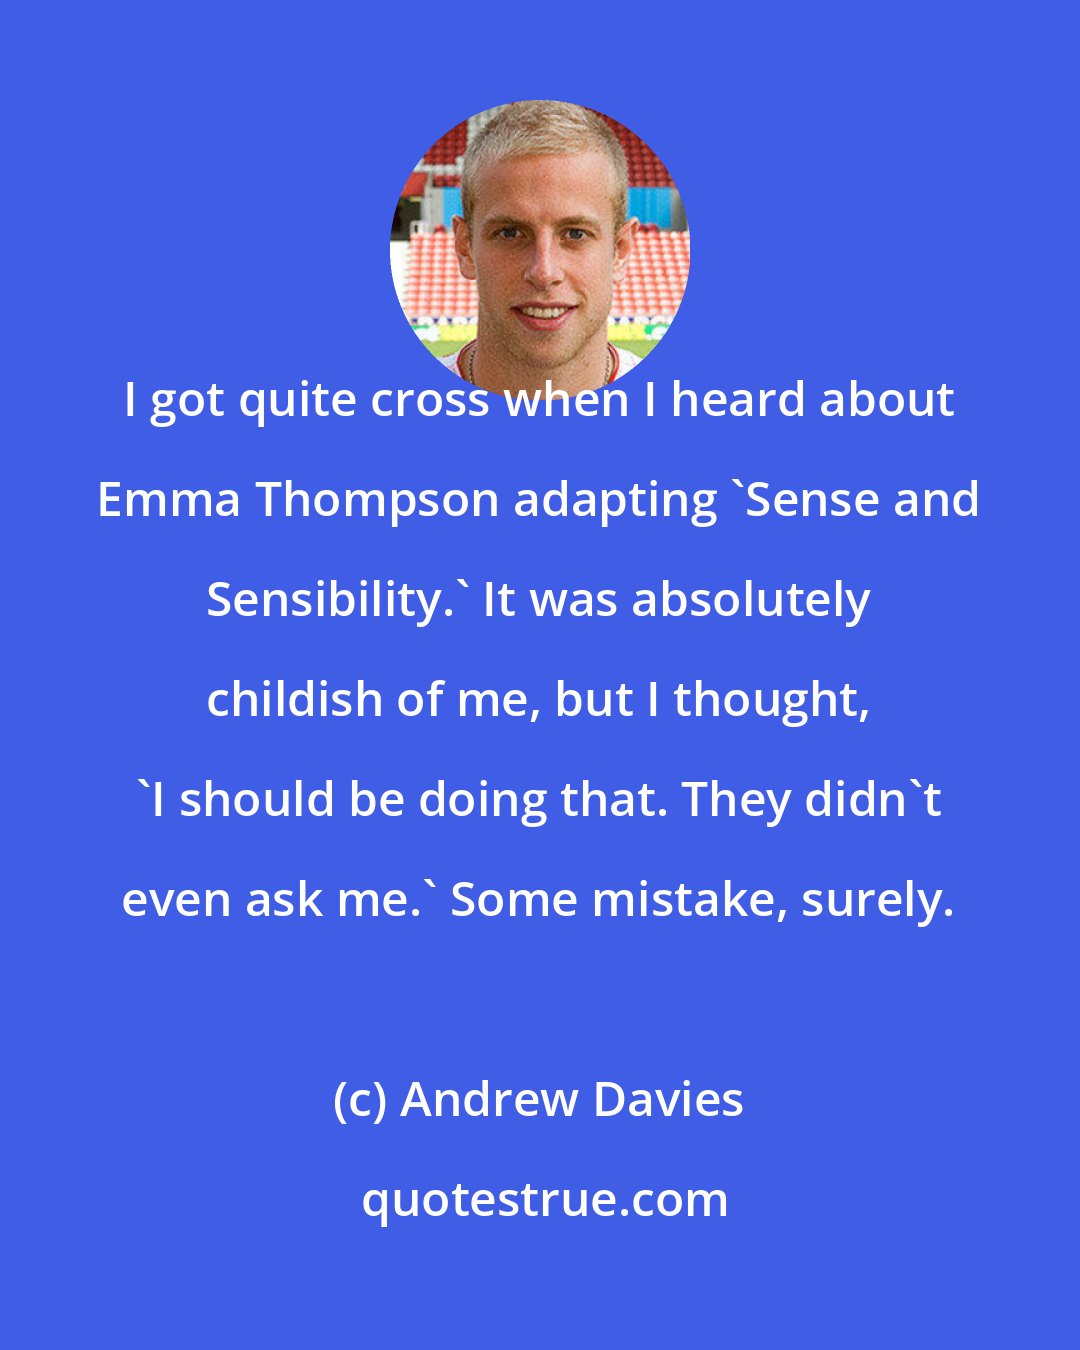 Andrew Davies: I got quite cross when I heard about Emma Thompson adapting 'Sense and Sensibility.' It was absolutely childish of me, but I thought, 'I should be doing that. They didn't even ask me.' Some mistake, surely.